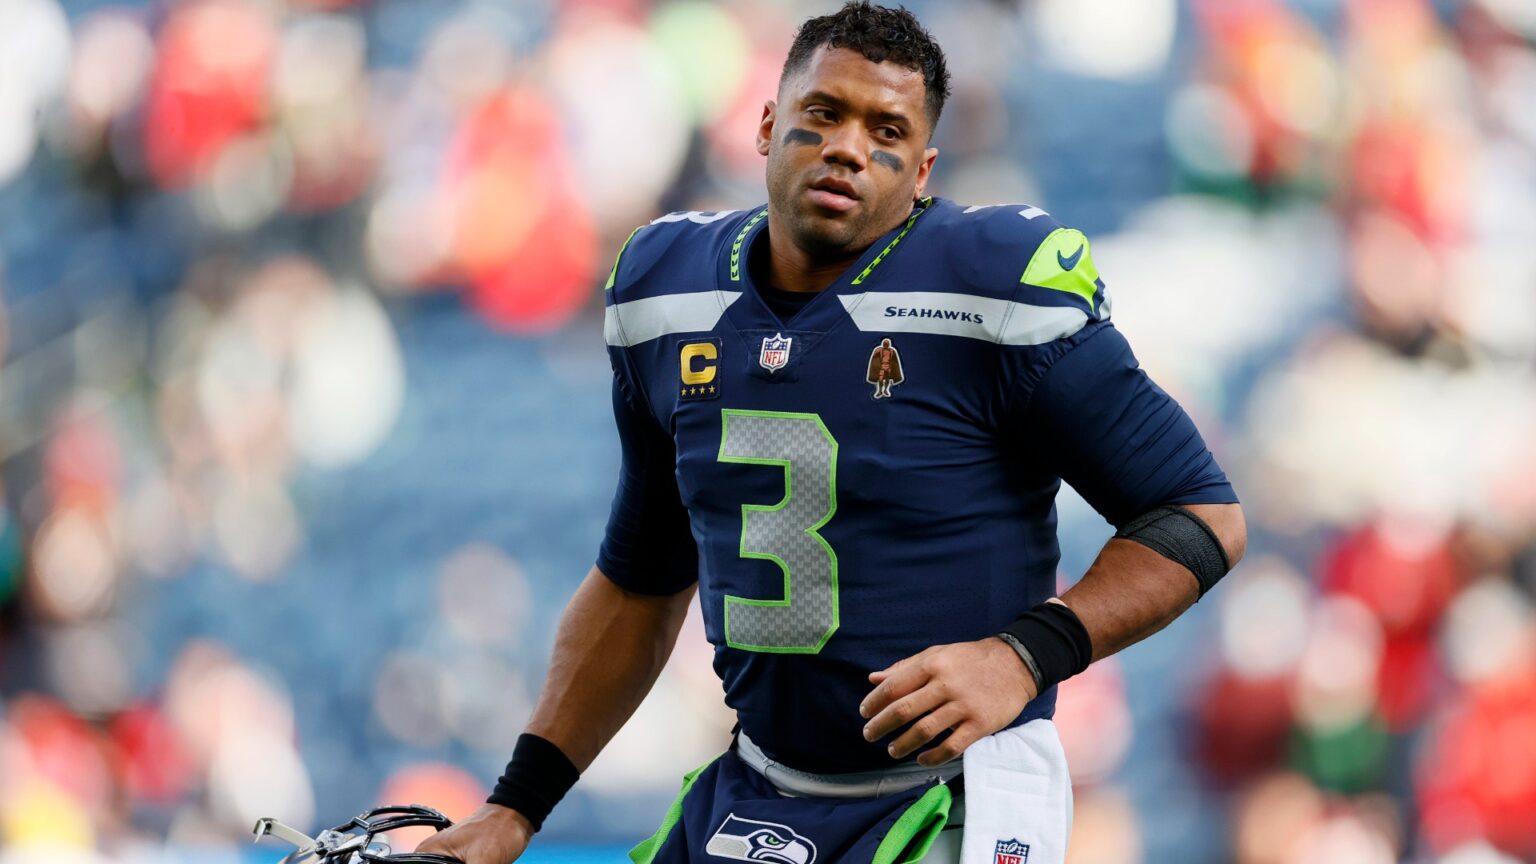 The Superbowl just passed, but many kept wondering how much an NFL player earns. How big is Russel Wilson’s net worth as an NFL quarterback?